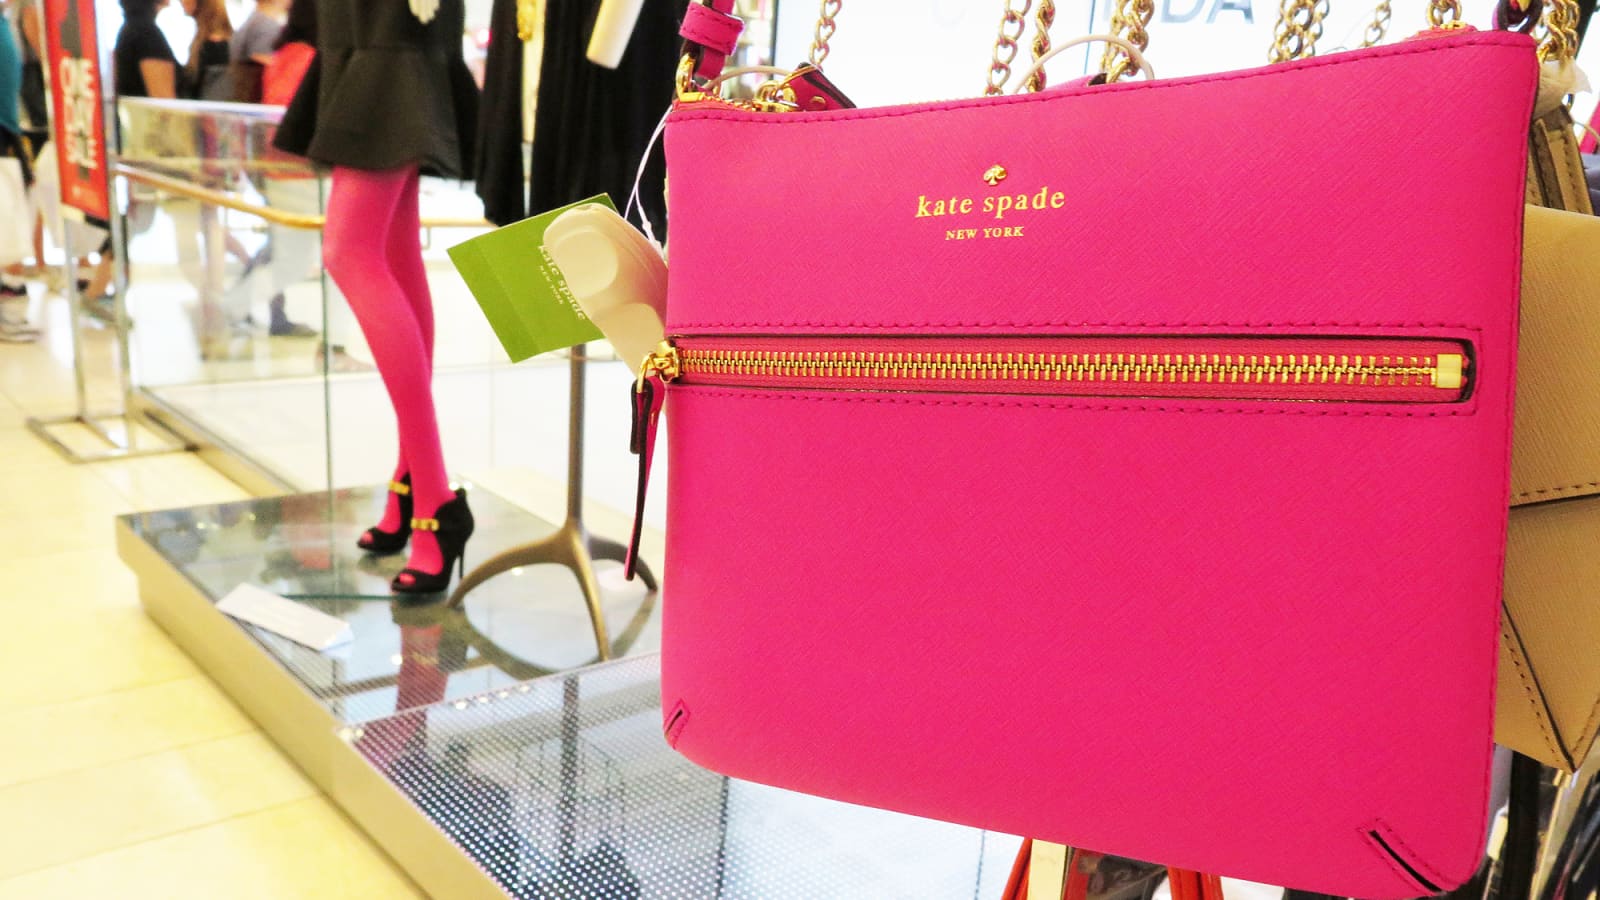 The Kate Spade brand is dragging down Tapestry